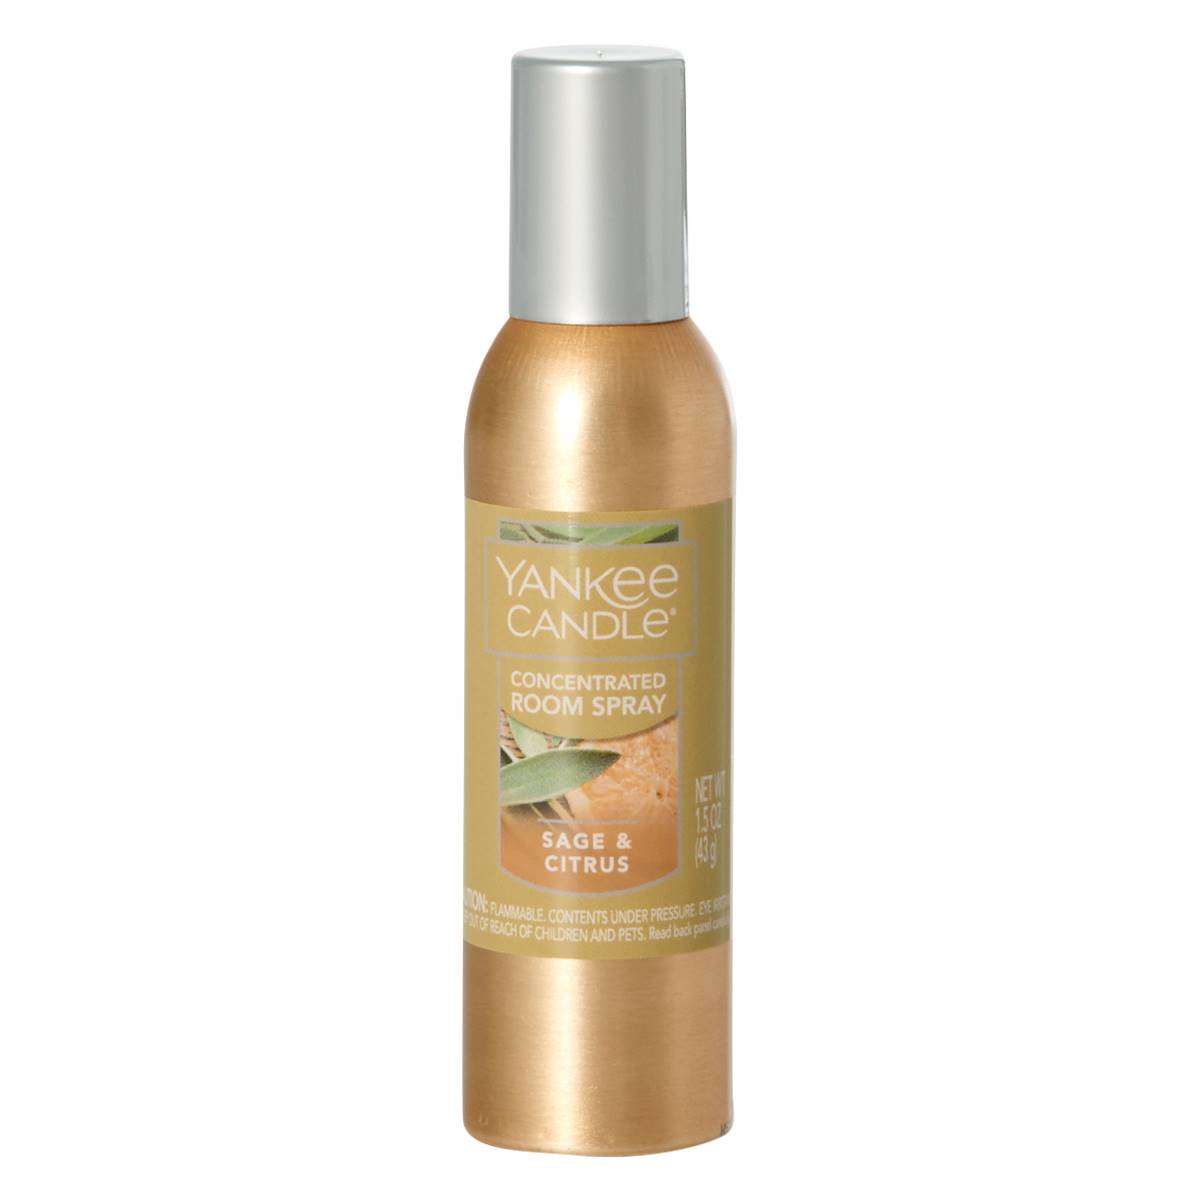 Yankee Candle(R) 1.5 Oz. Sage And Citrus Concentrated Room Spray